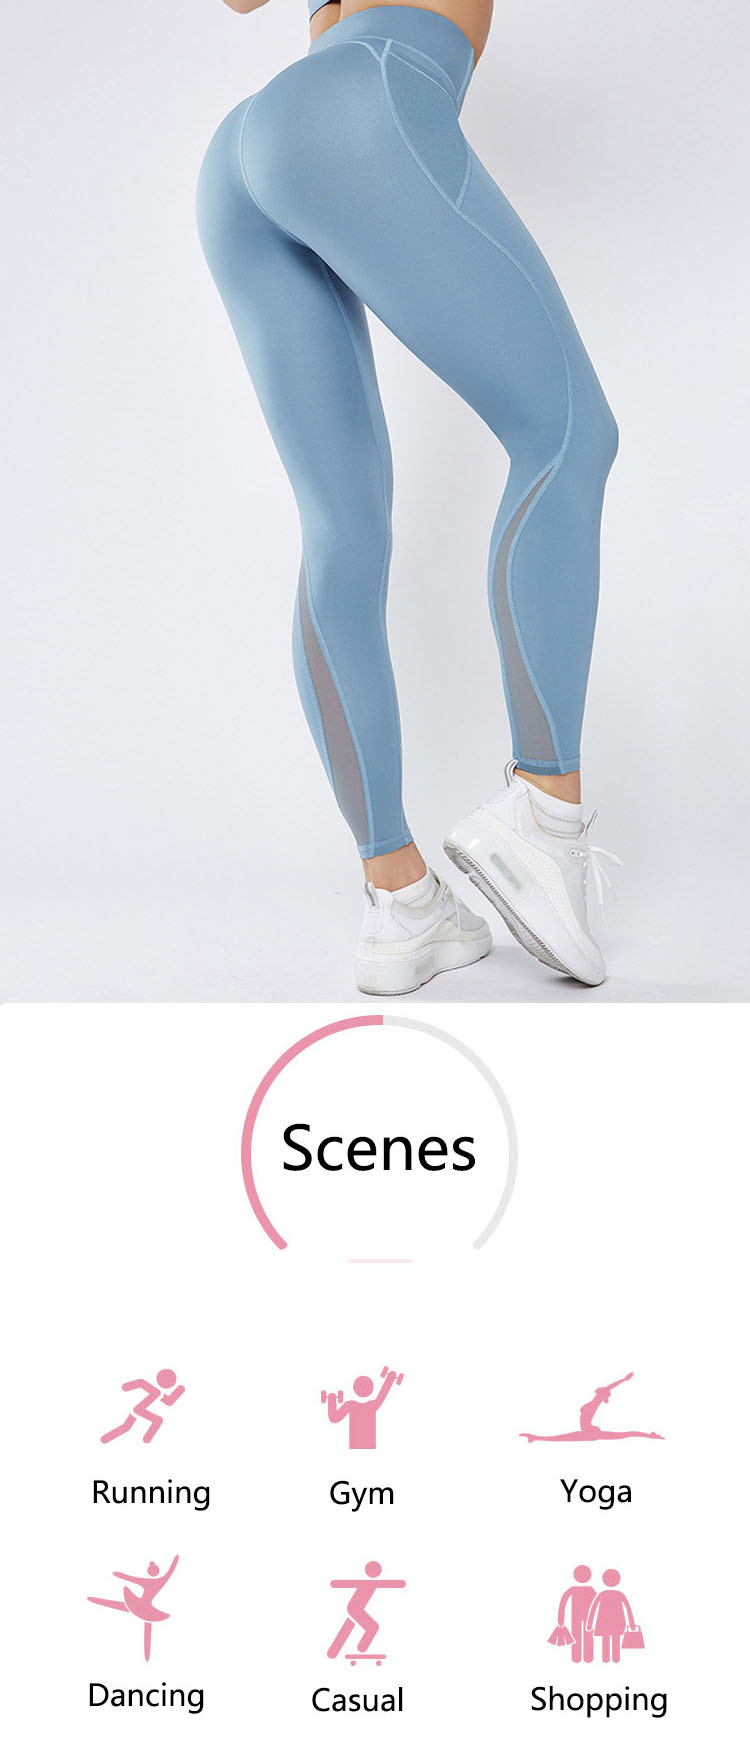 The side seam design of the stretch yoga pants